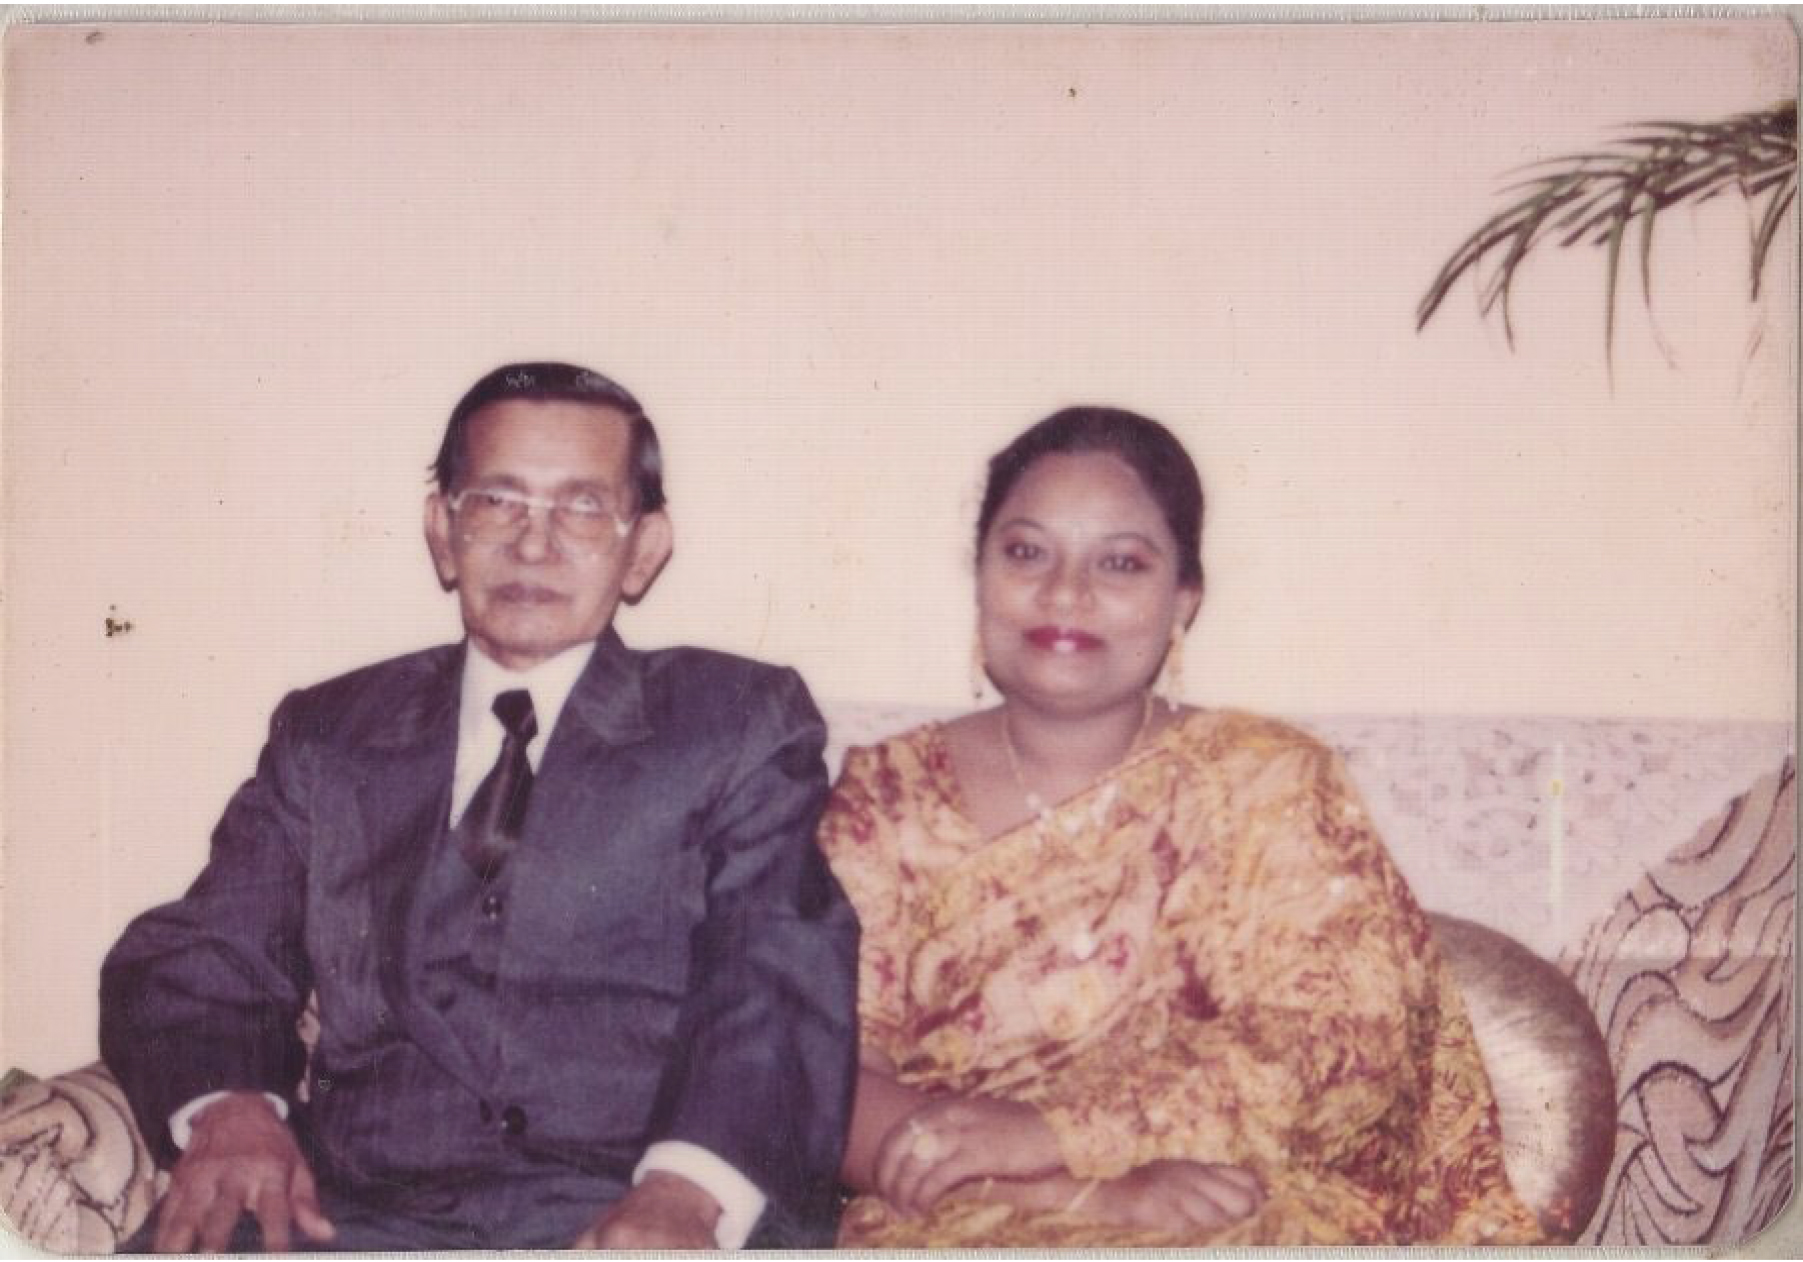 Syed Rabbani’s father, Syed Shamsul Alam, and stepmother, Henoara Begum, in an undated family photograph included in a letter to the court filed by Mr. Rabbani’s attorneys